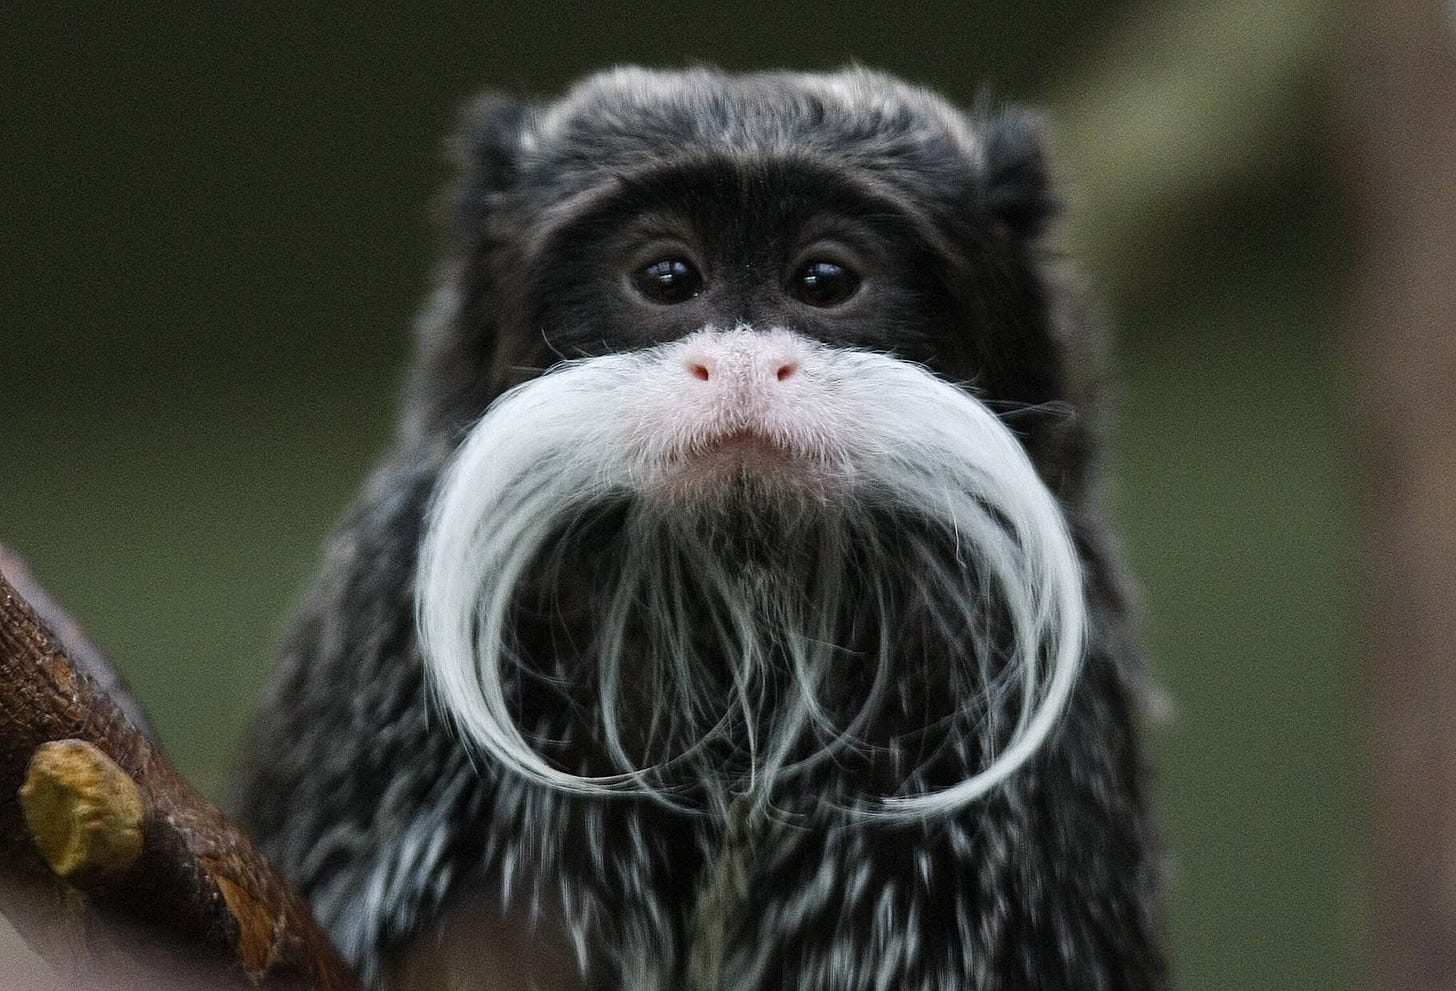 An Emperor Tamarin Monkey. | Animal facts, Fun facts about animals, Animals beautiful